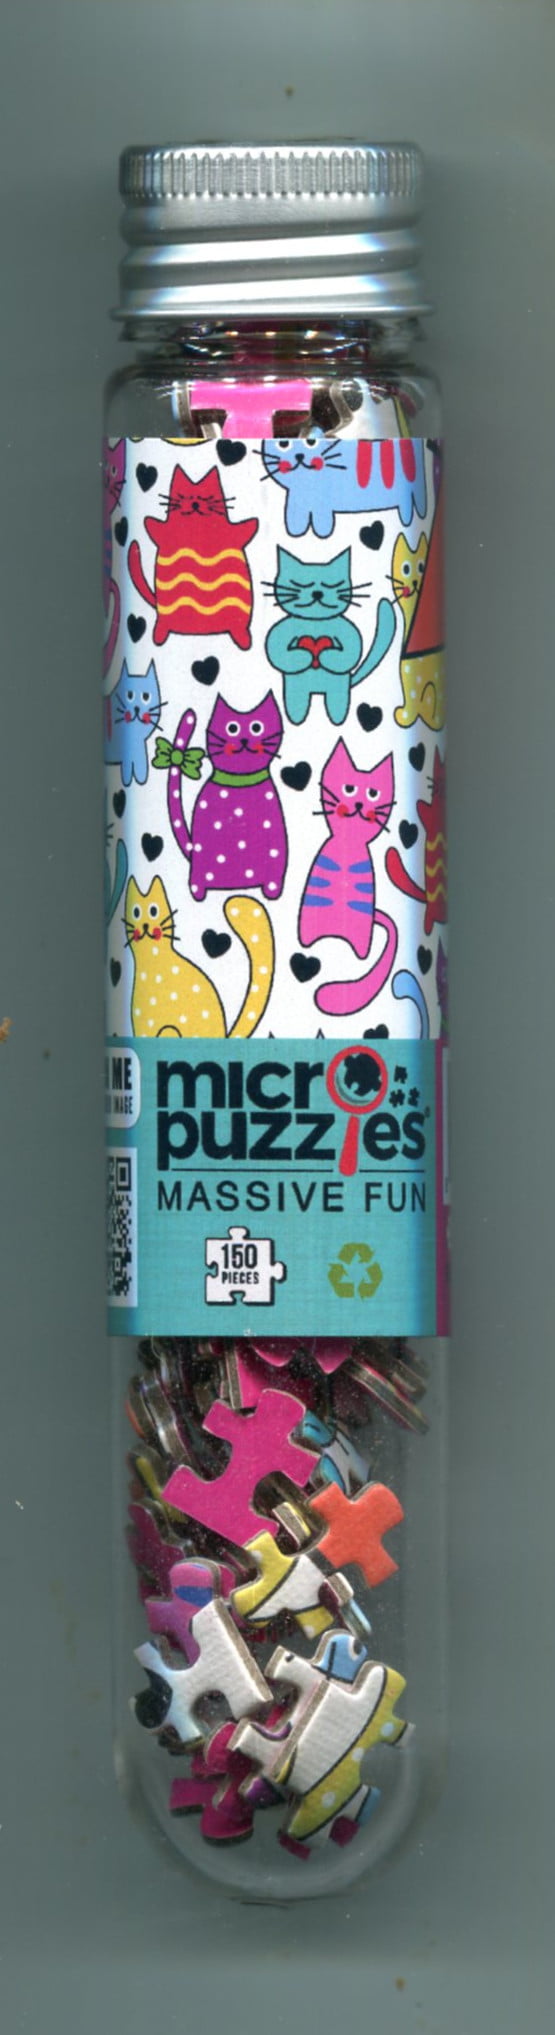 Micro Puzzles Brian’s Worst Nightmare Cats 150 pc Micro Jigsaw Puzzle Test Tube  850020243136